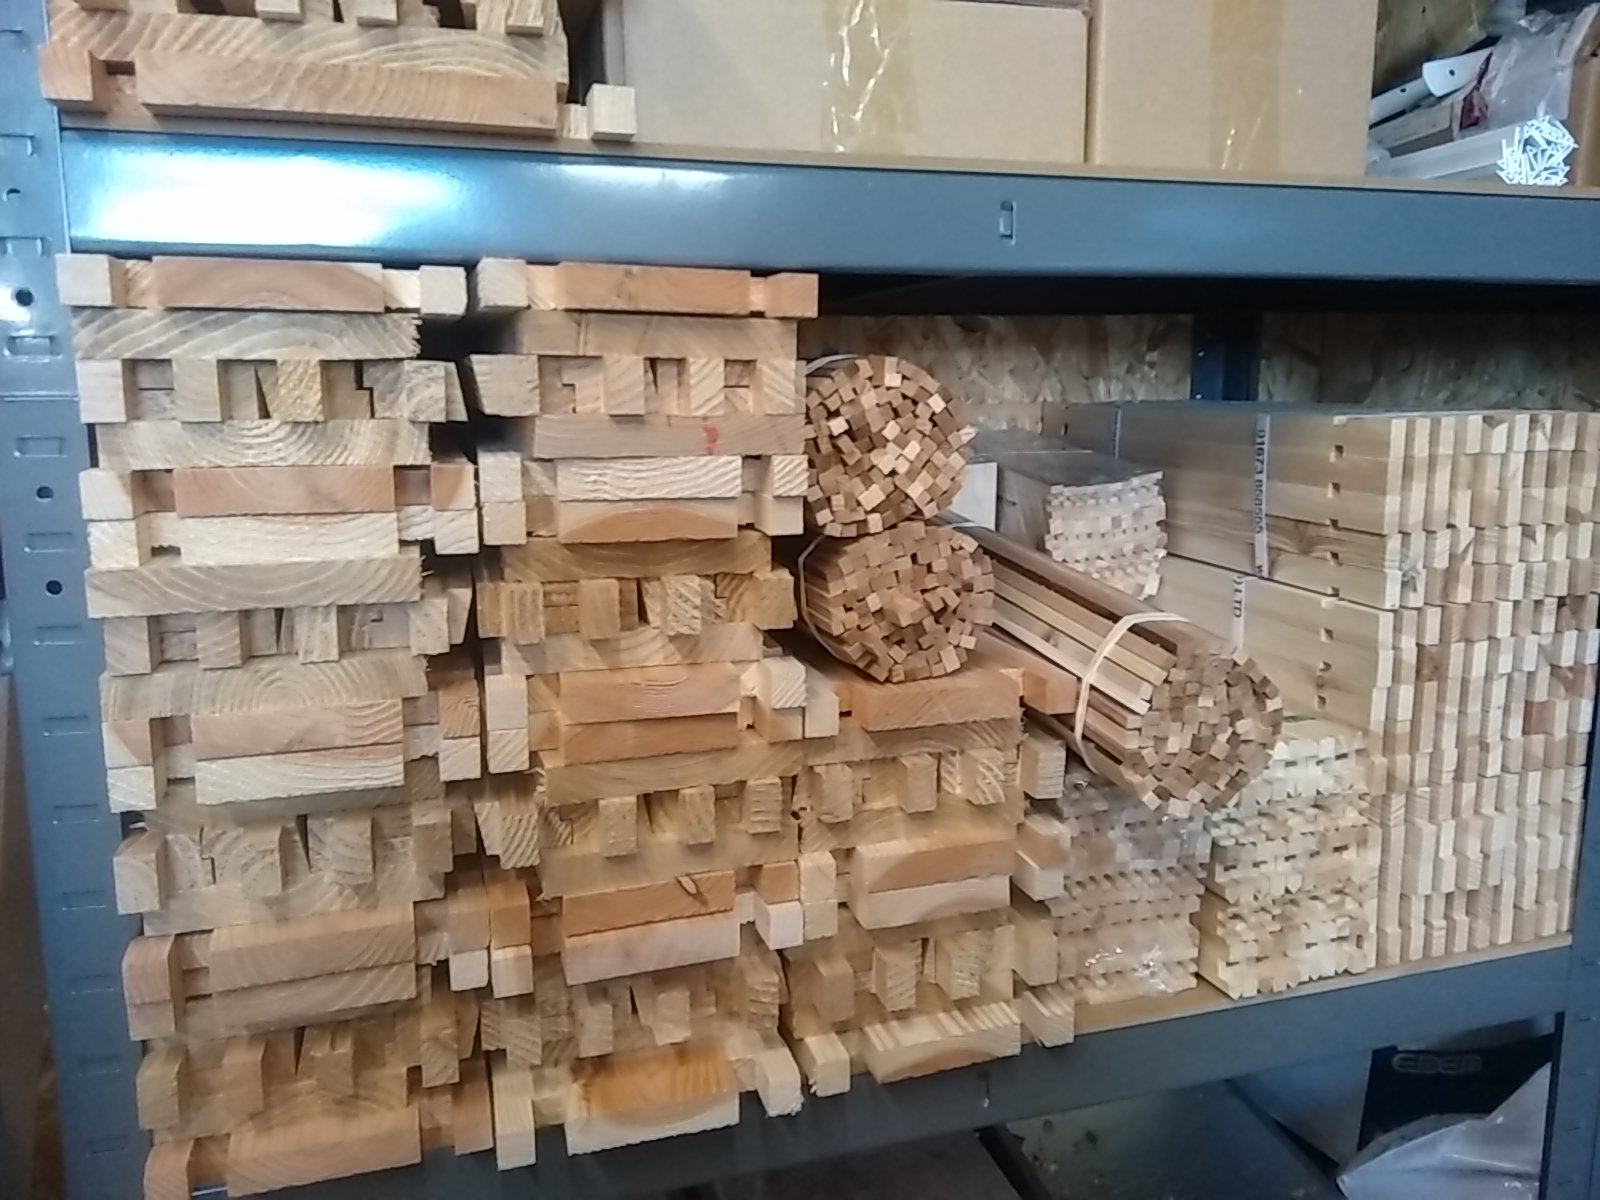 Frames and hive parts